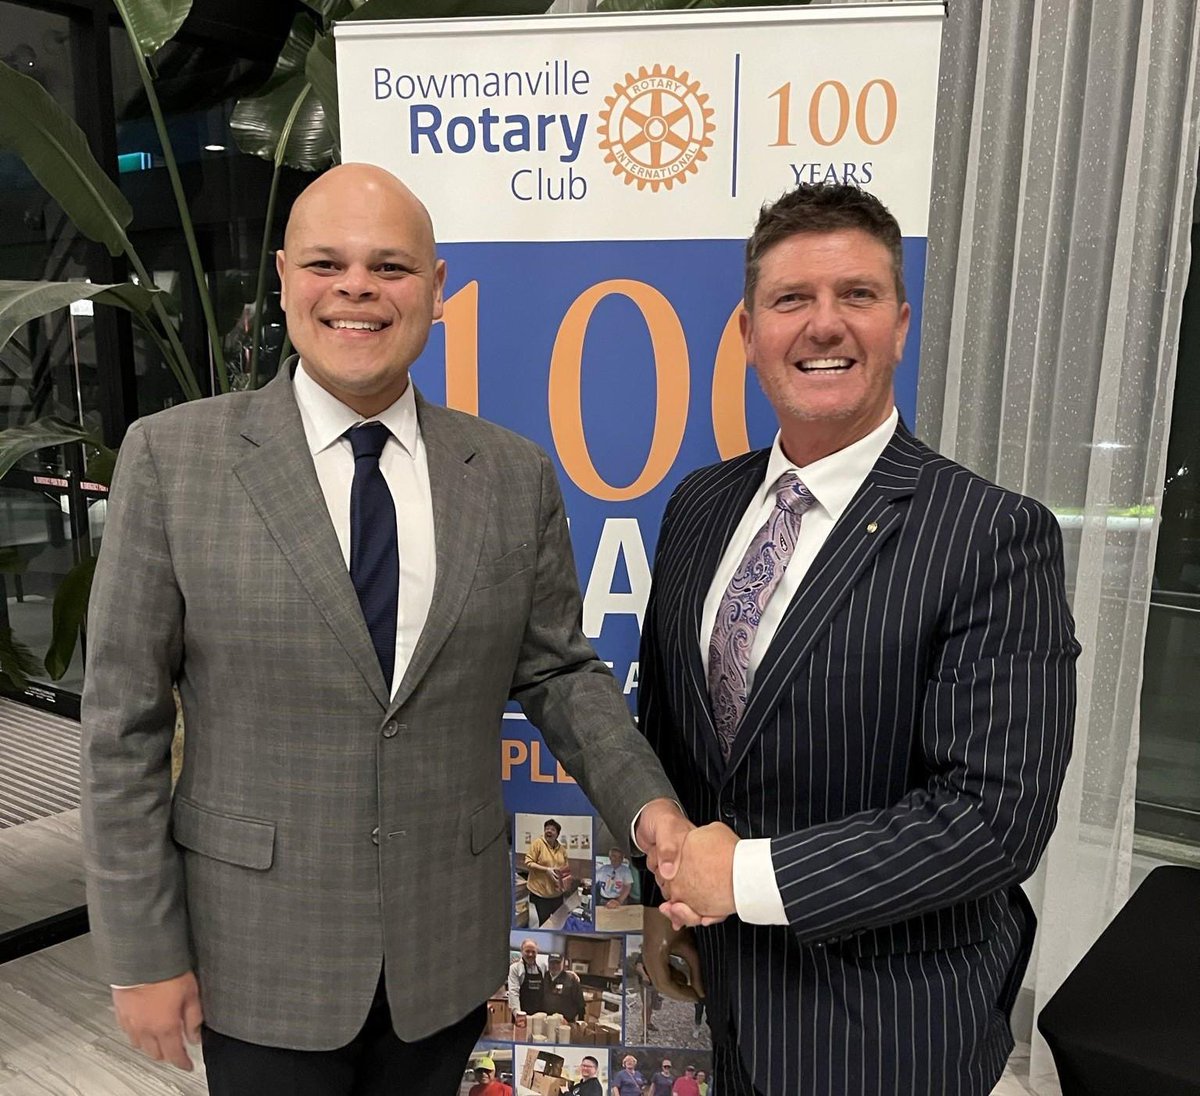 Celebrating 100 years of the Bowmanville Rotary Club. Congratulations to Rotarians for reaching this big milestone and to the inspiring charities that received grants in support of their work in the community. Here's to another century of service above self.